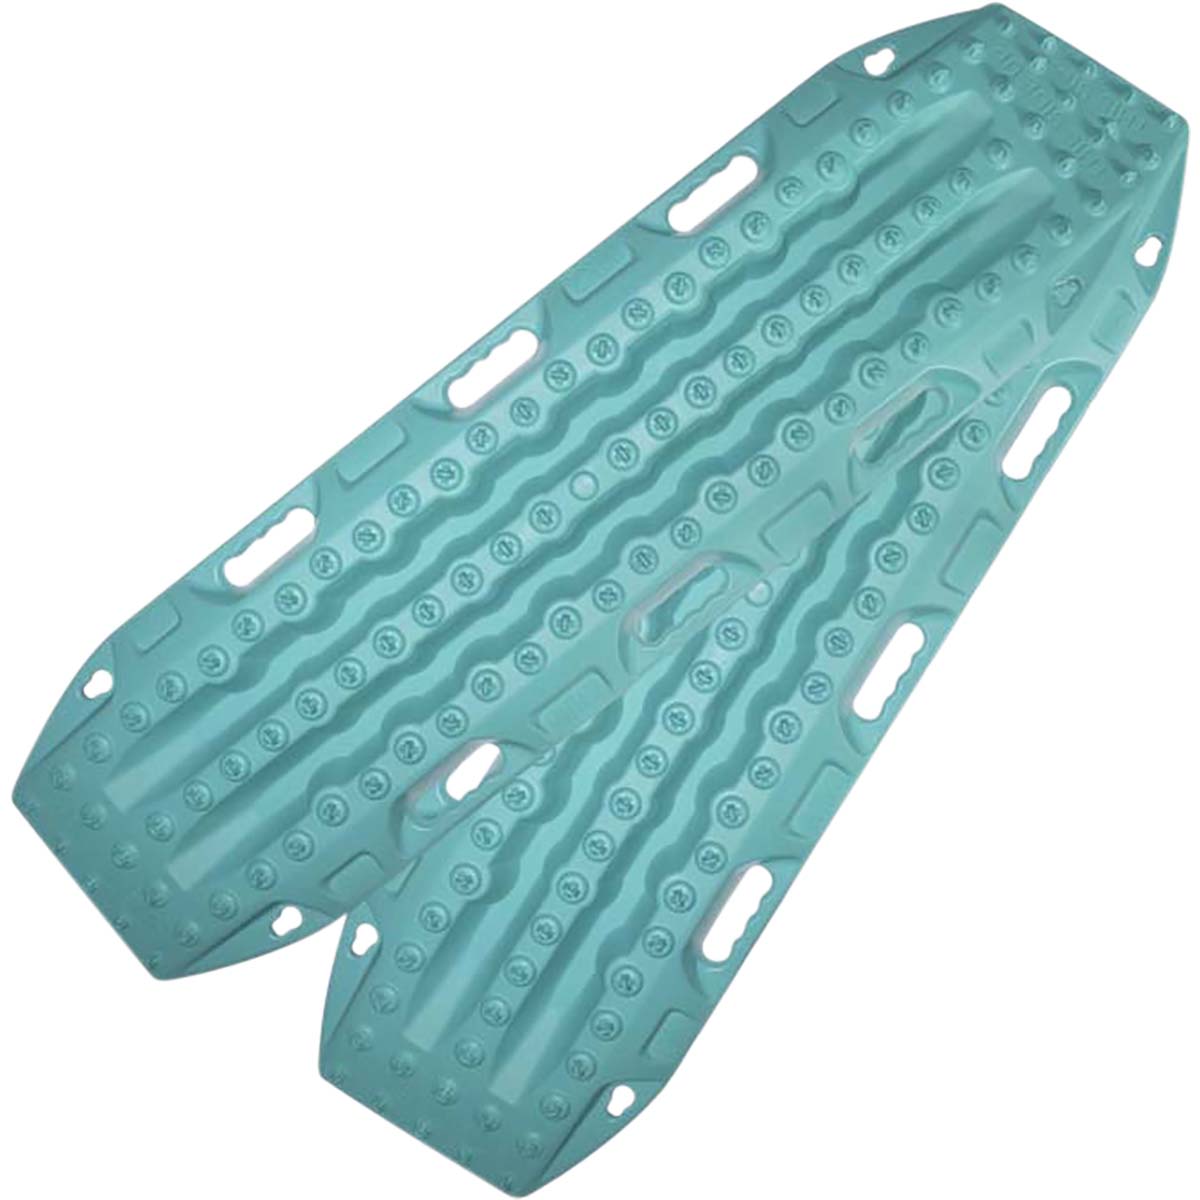 Maxtrax MKII Recovery Boards Turquoise